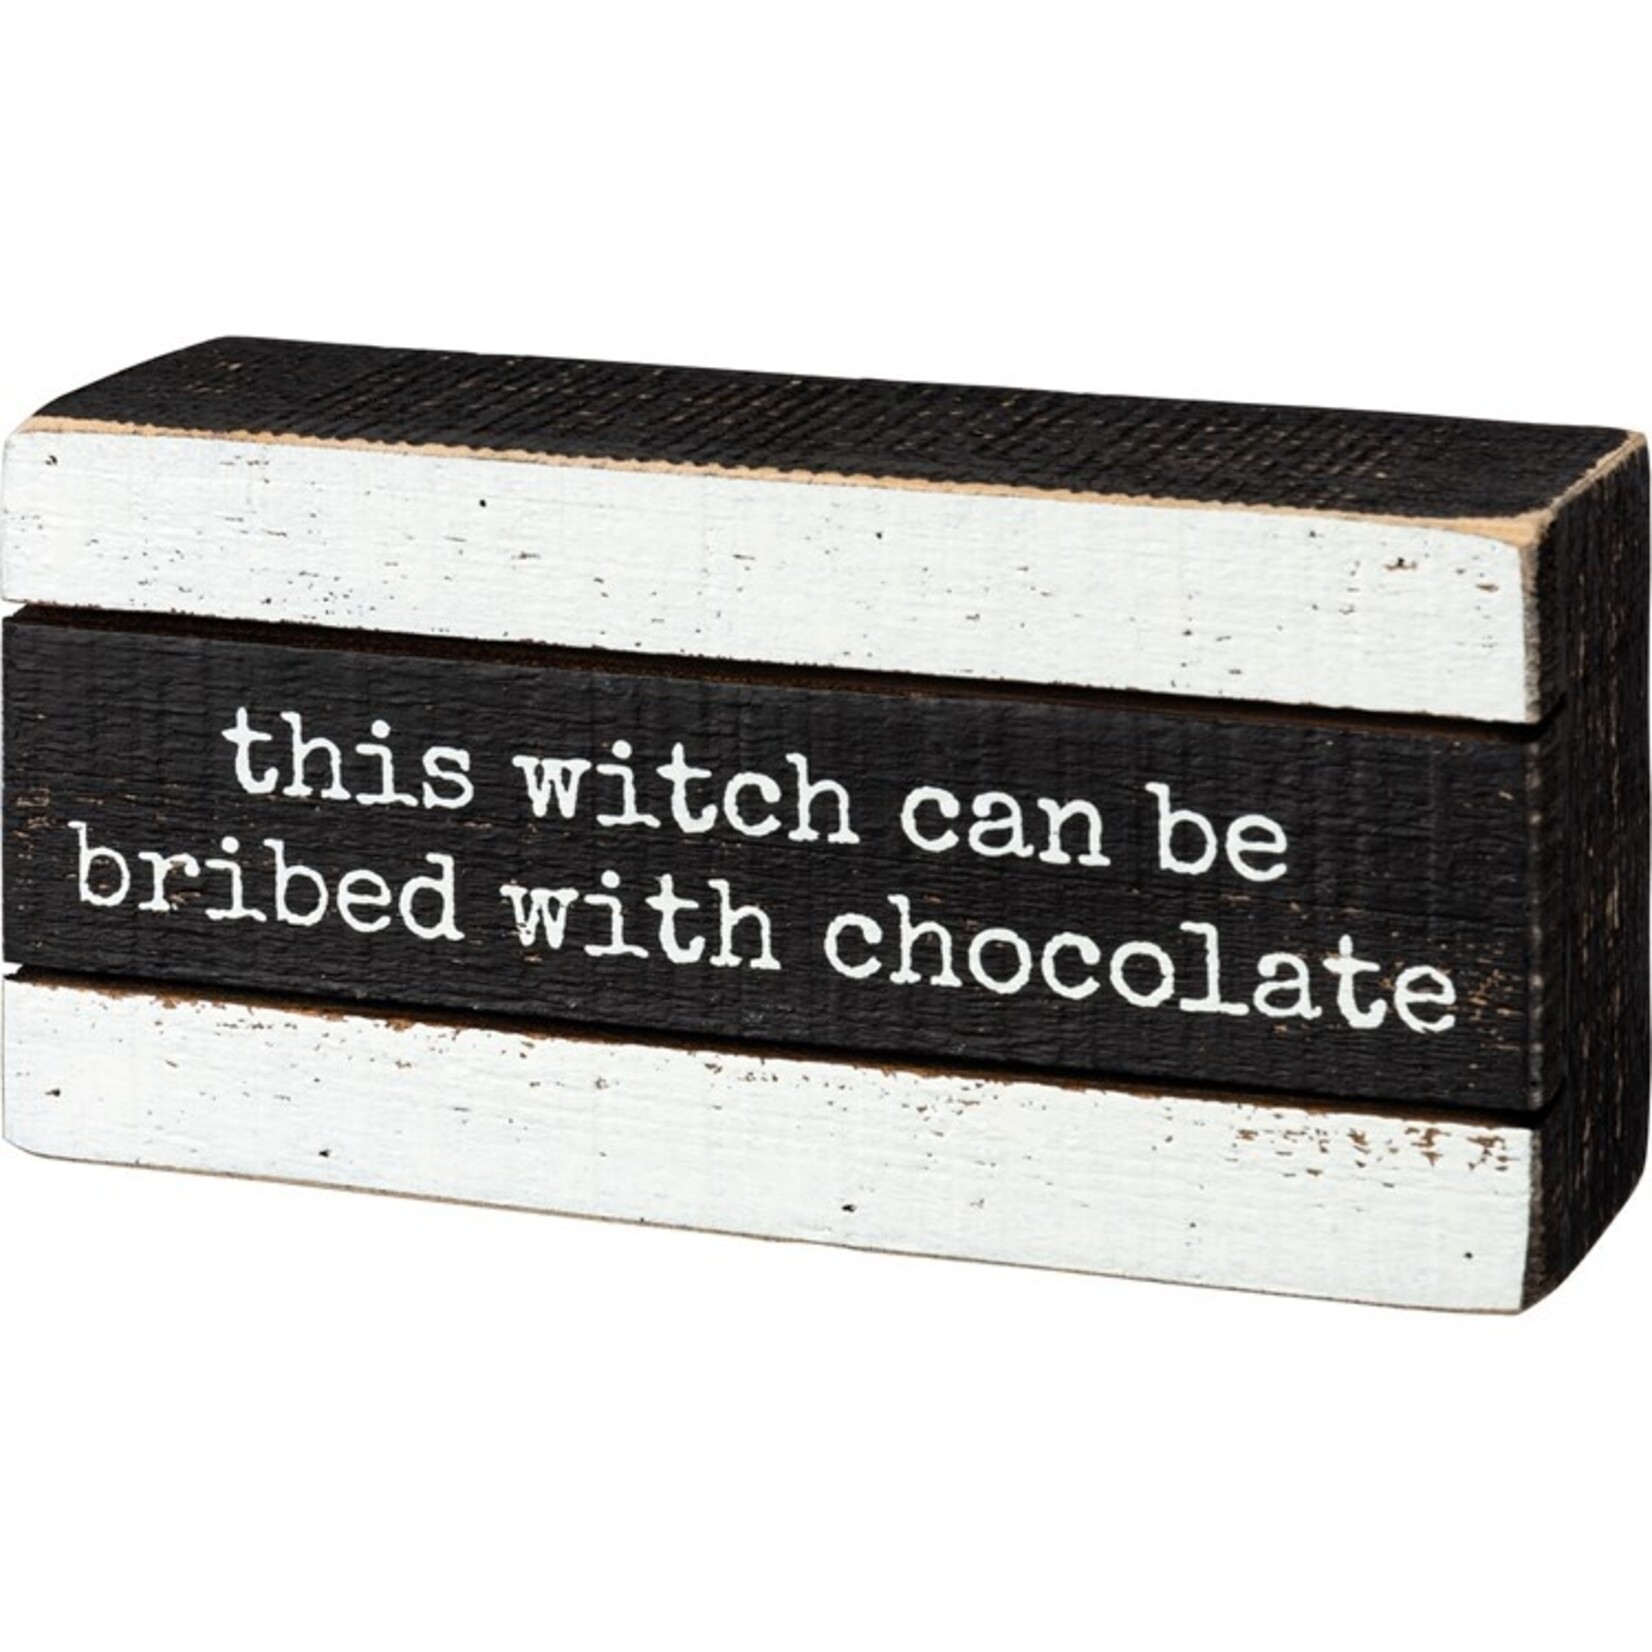 Primitives by Kathy Primitives by Kathy-This Witch Can Be Bribed Slat Box Sign